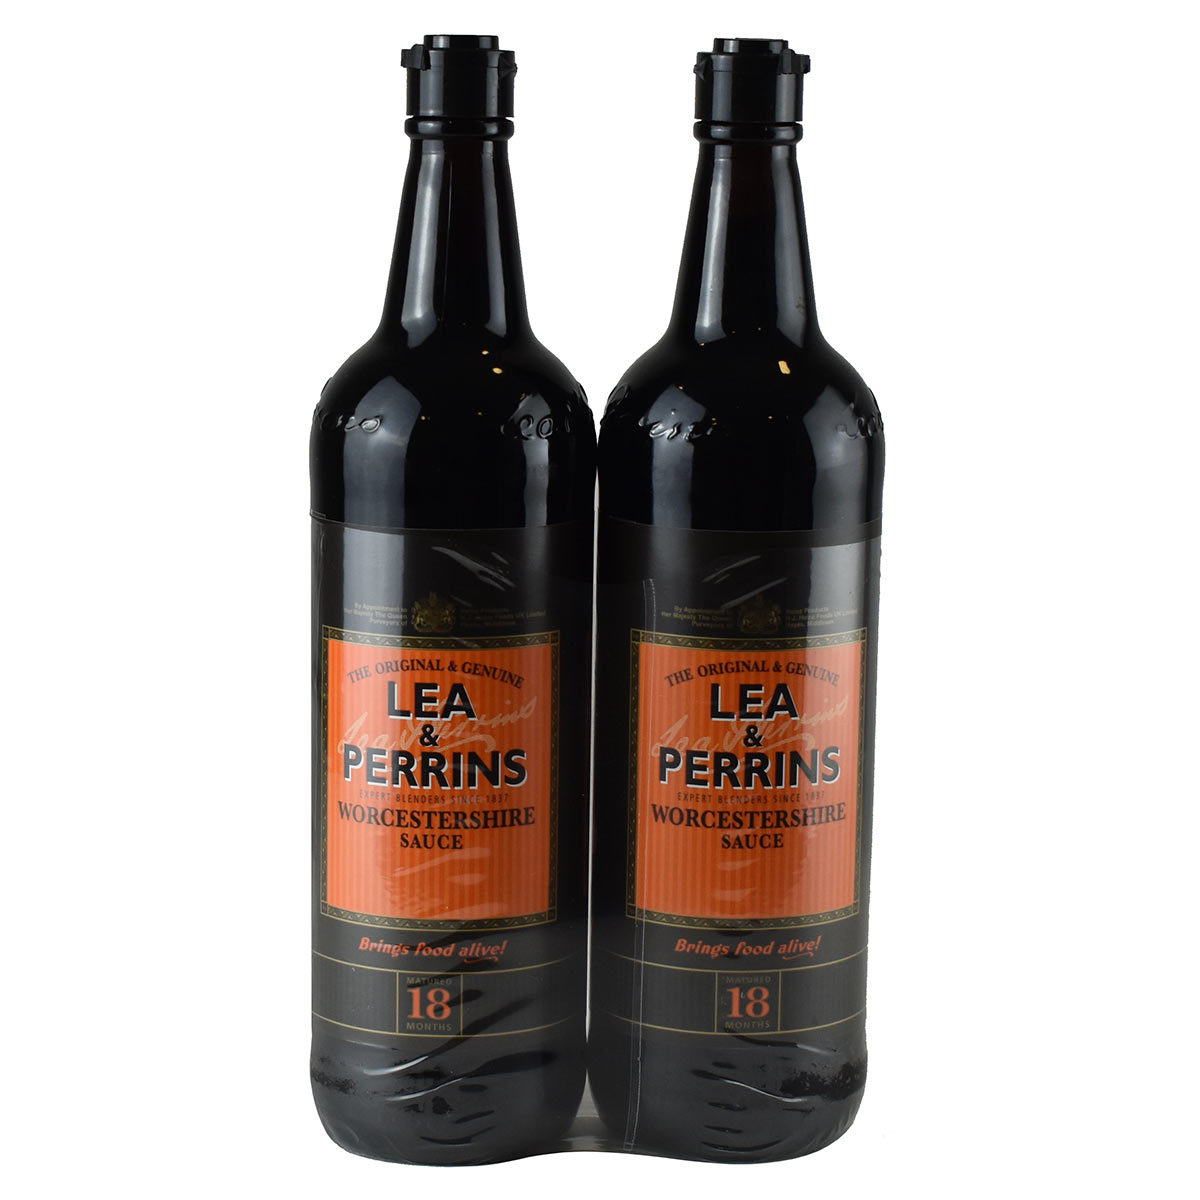 Twin pack bottle of lea and perrins front facing on white background